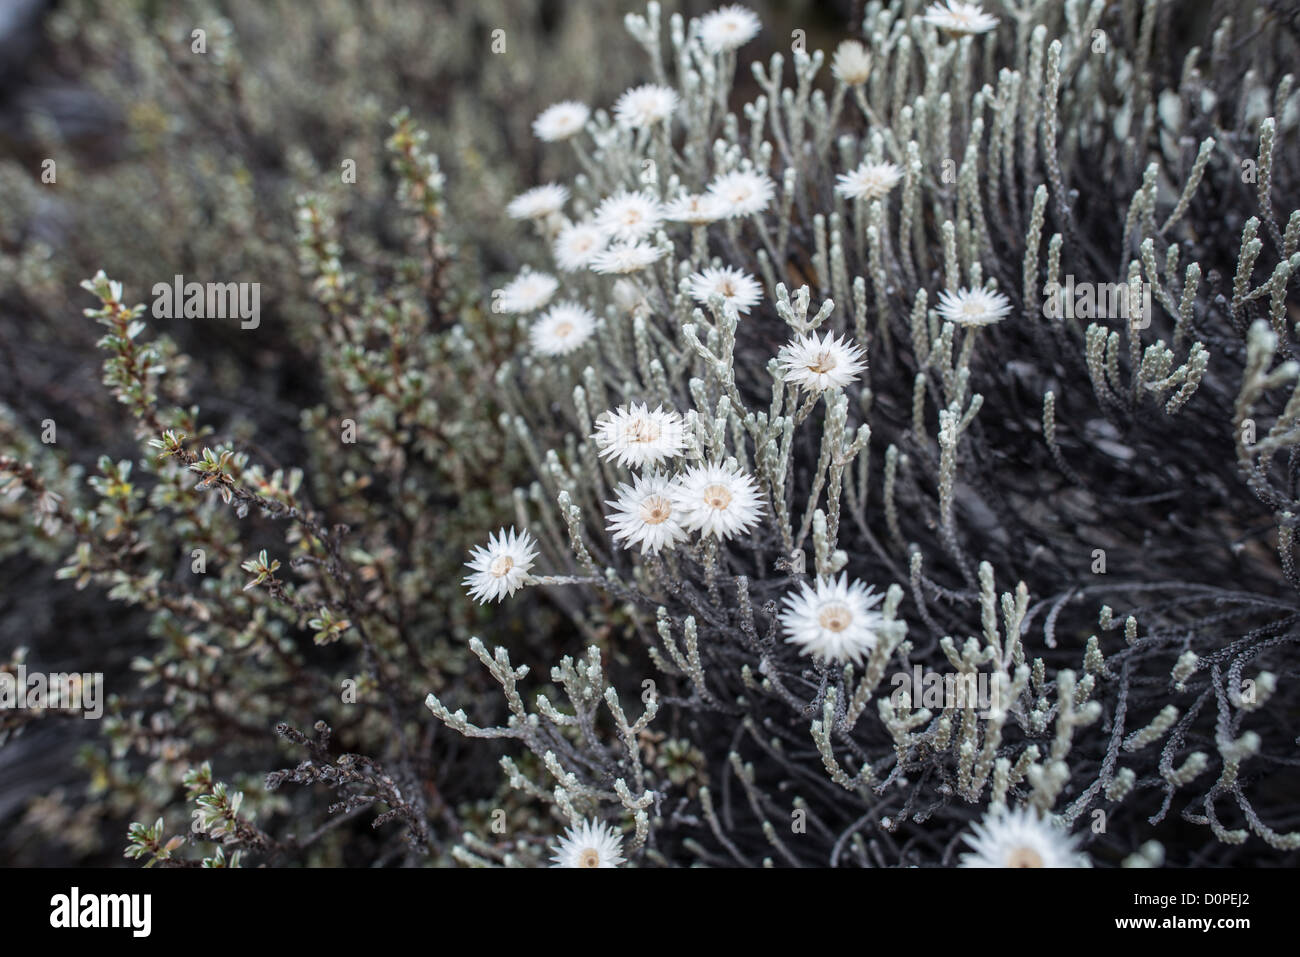 MT KILIMANJARO, Tanzania - Everlastings (Helichrysum) in flower in the heath zone of Mt Kilimanjaro. These are a distinctive and common plant in this elevation of the mountain. Stock Photo